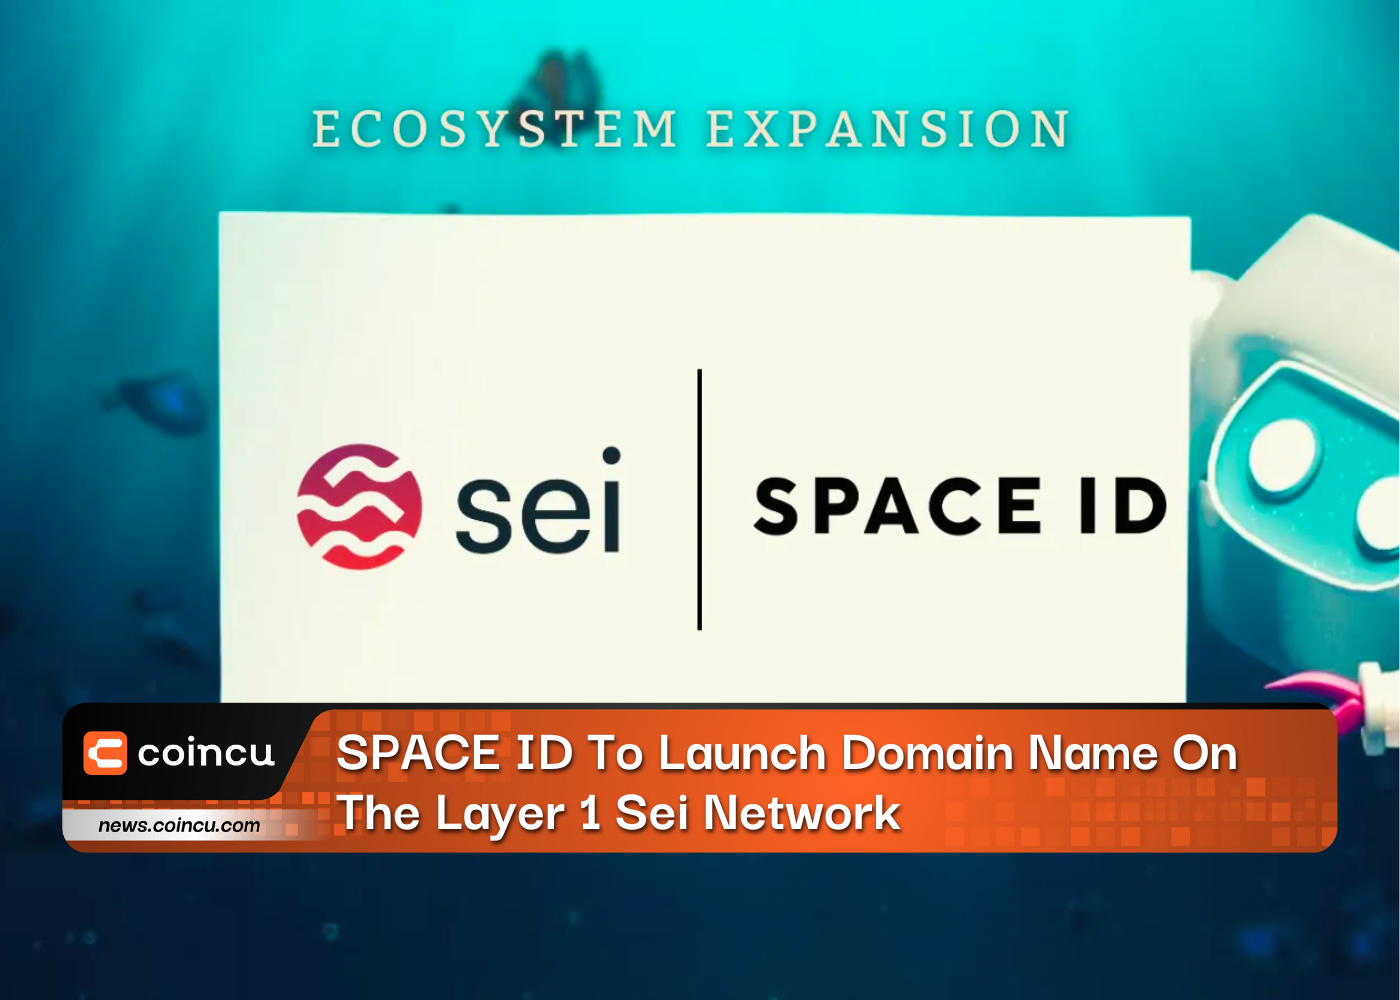 SPACE ID To Launch Domain Name On The Layer 1 Sei Network